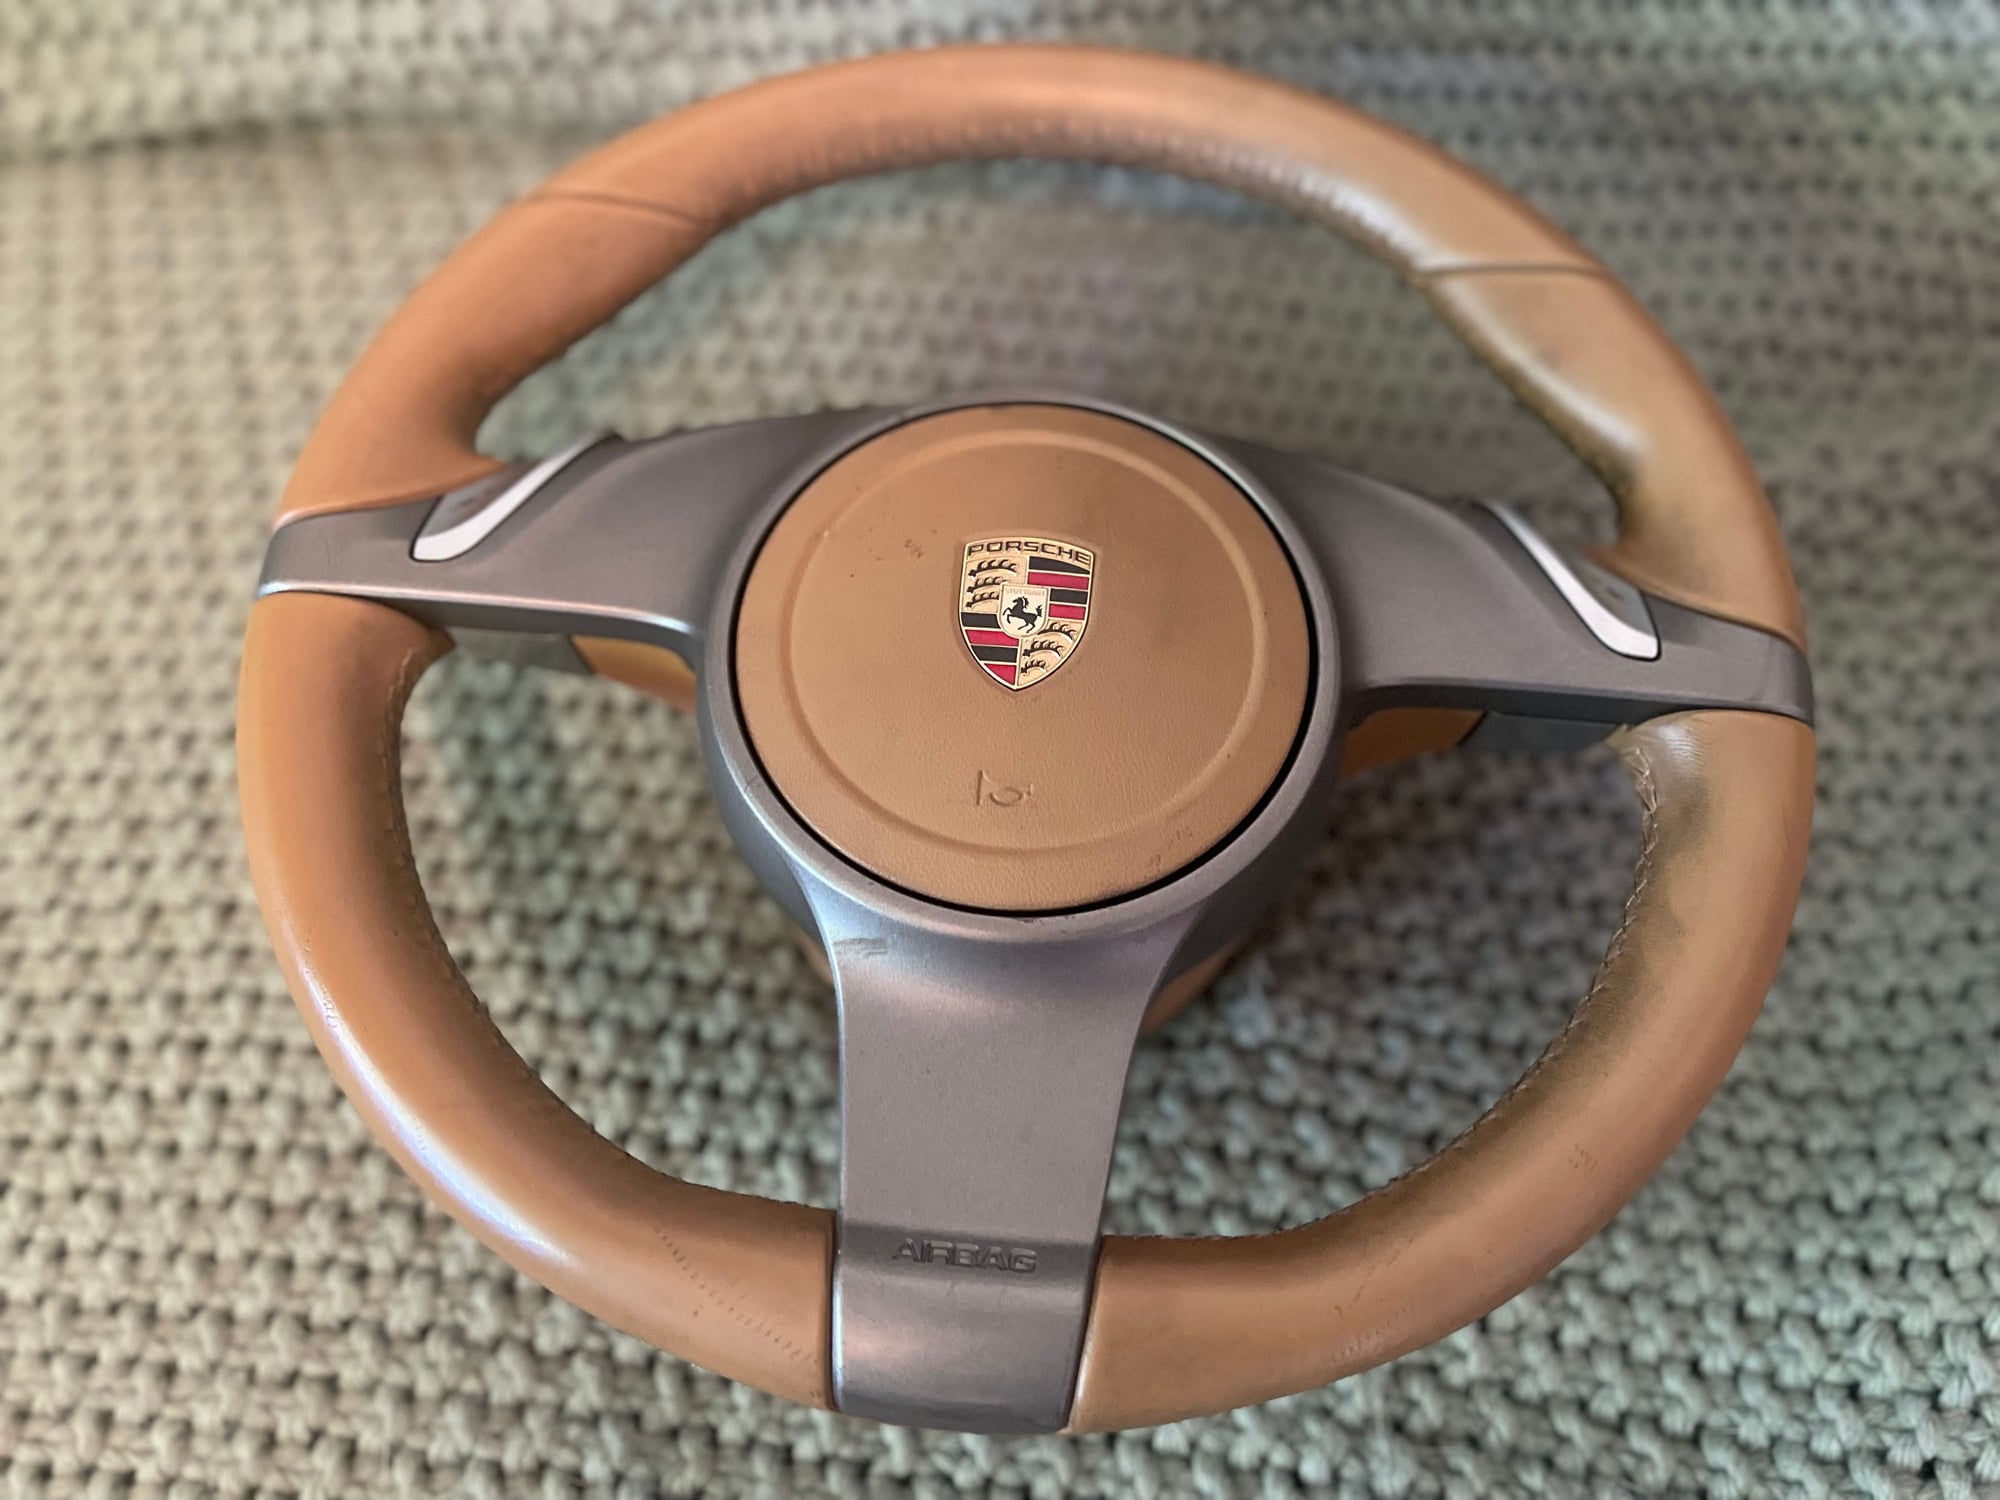 Miscellaneous - 987.2 parts for sale - steering wheel, custom lightweight exhaust - Used - All Years Porsche Cayman - Walnut Creek, CA 94598, United States